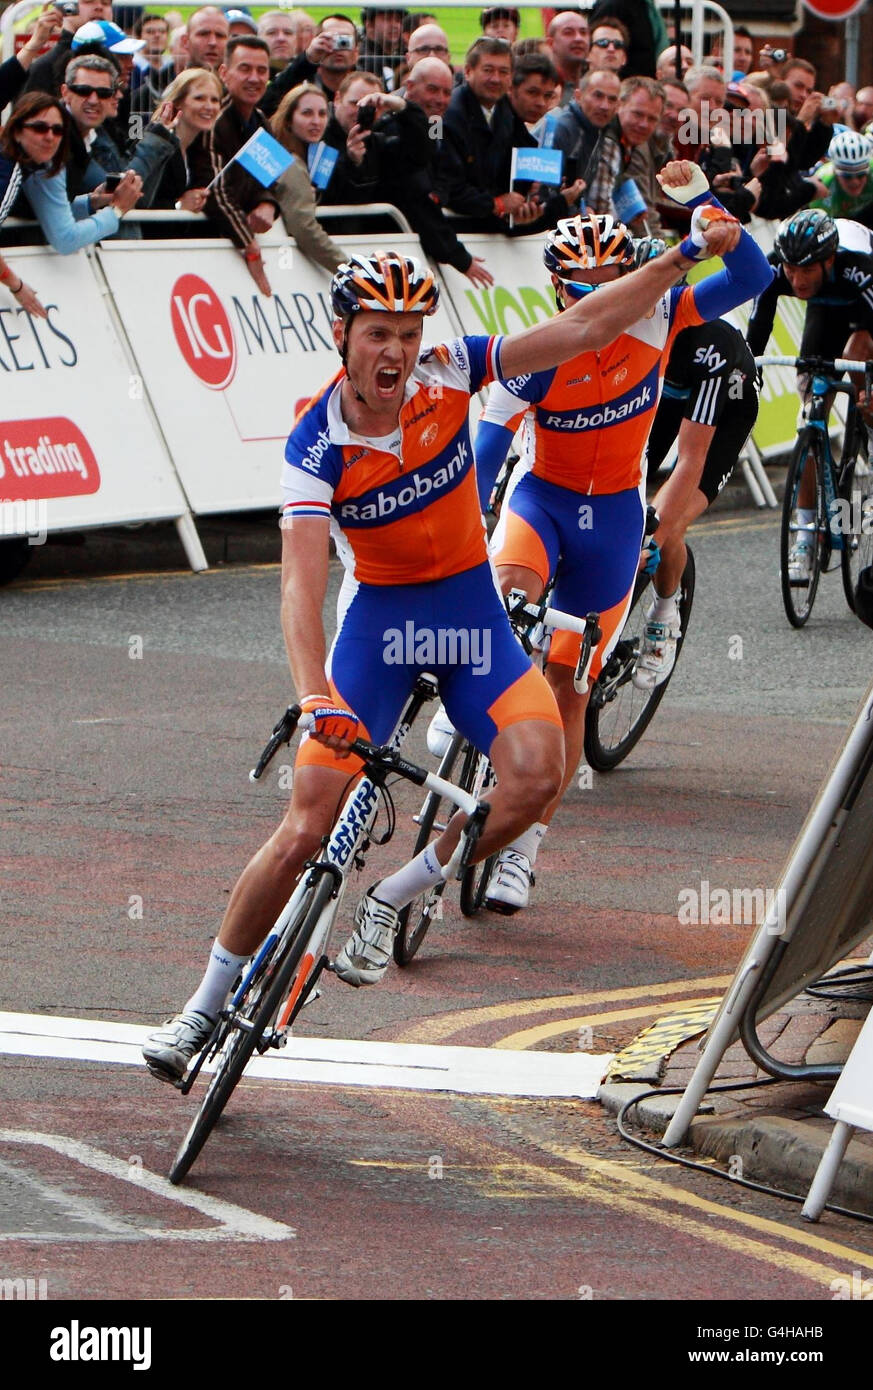 Rabobank's Lars Boom celebrates winning Stage Three of the Tour of Britain, Stoke on Trent, Staffordshire. Stock Photo